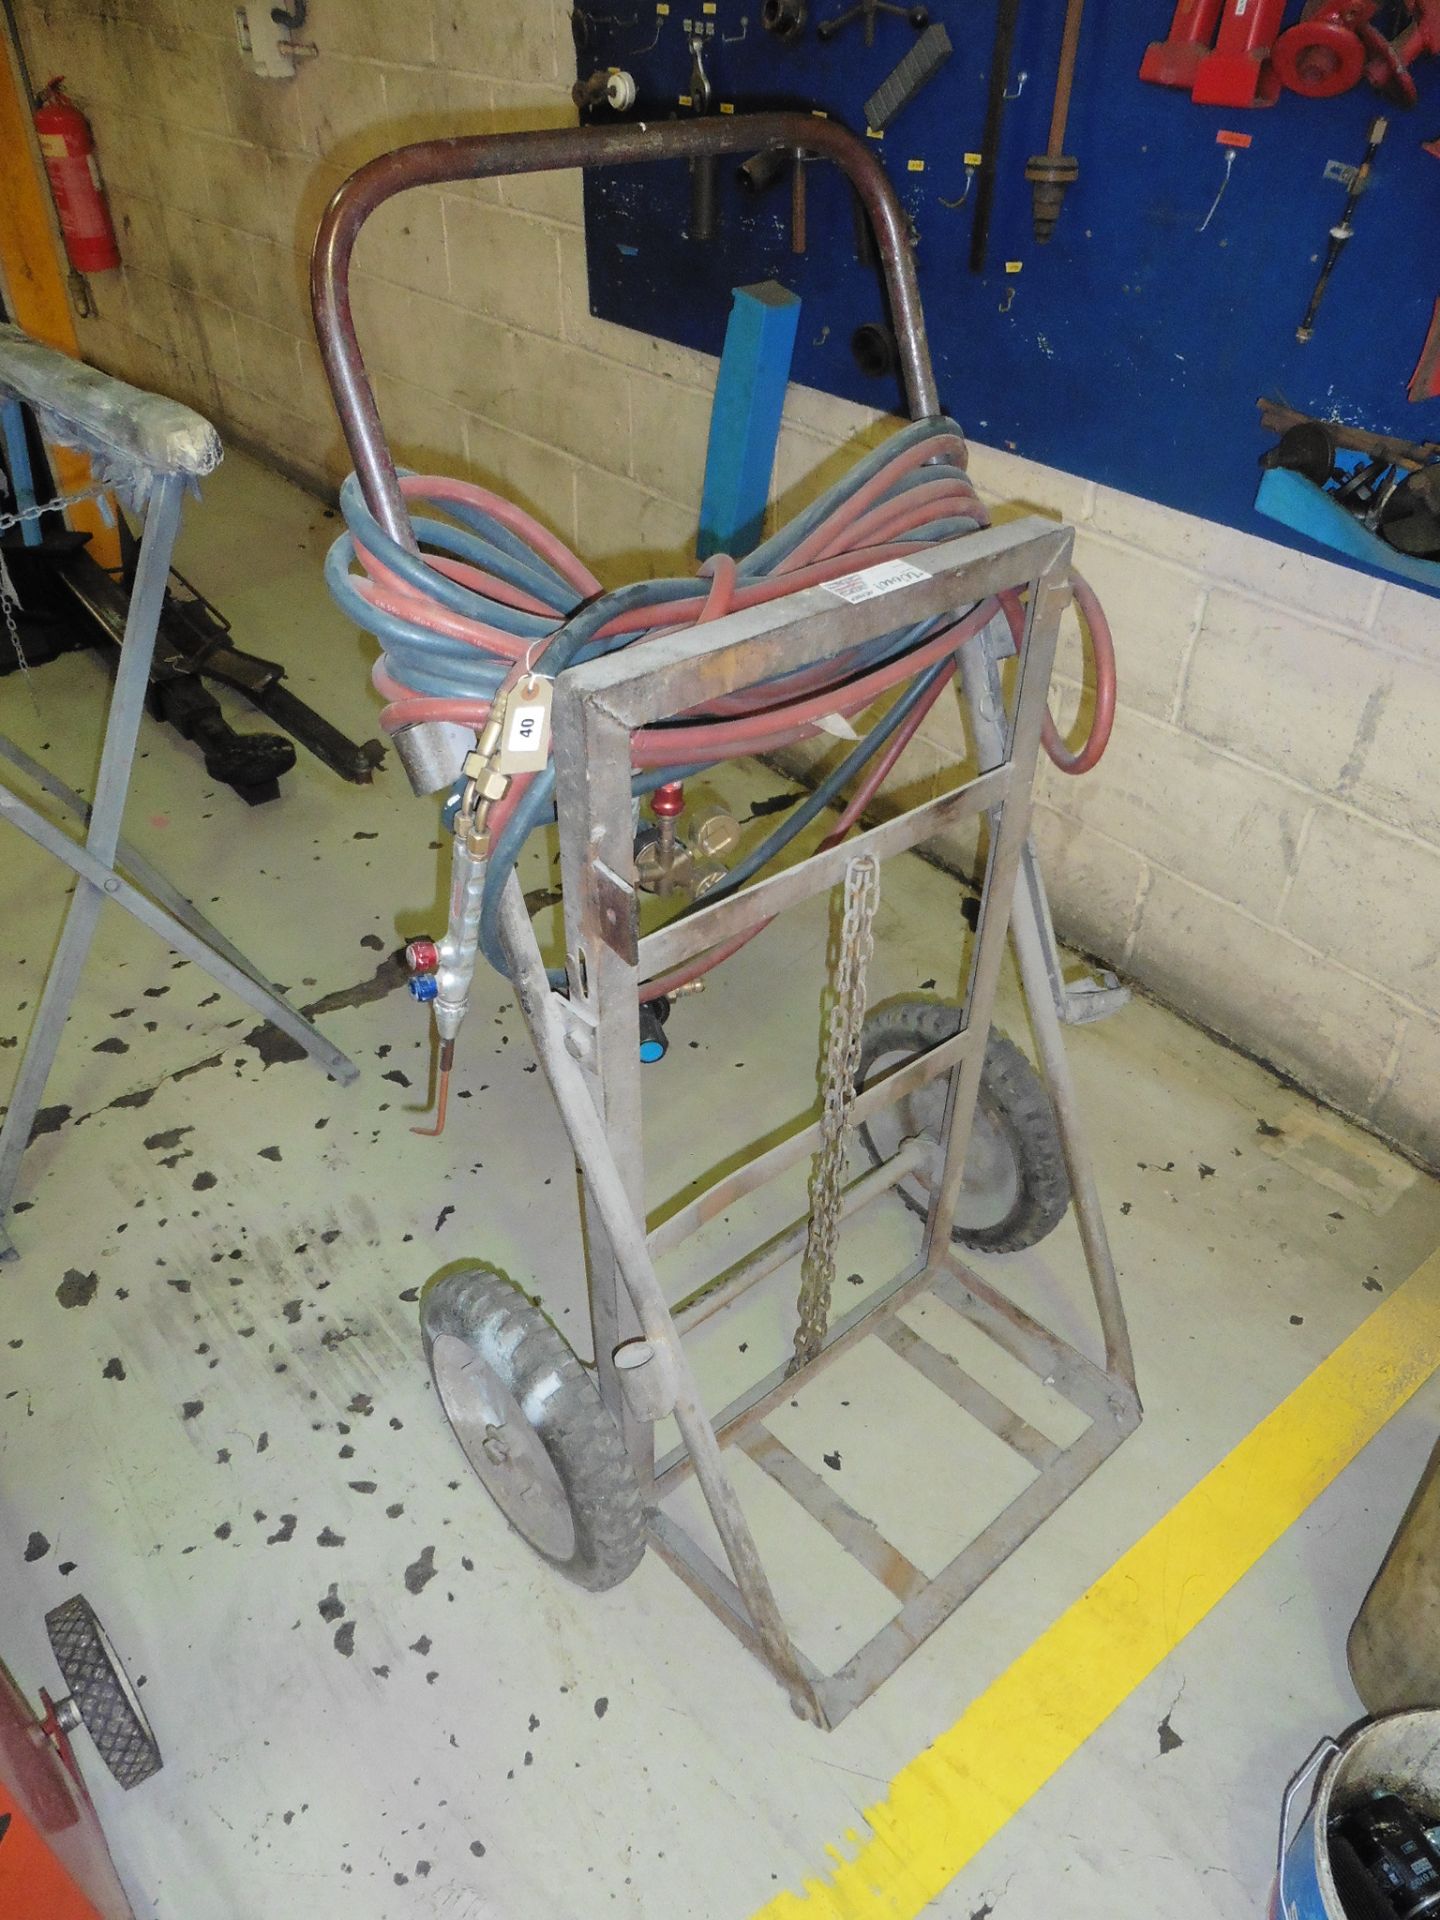 Set of oxy-acetylene welding gear with hose, gauges and trolley